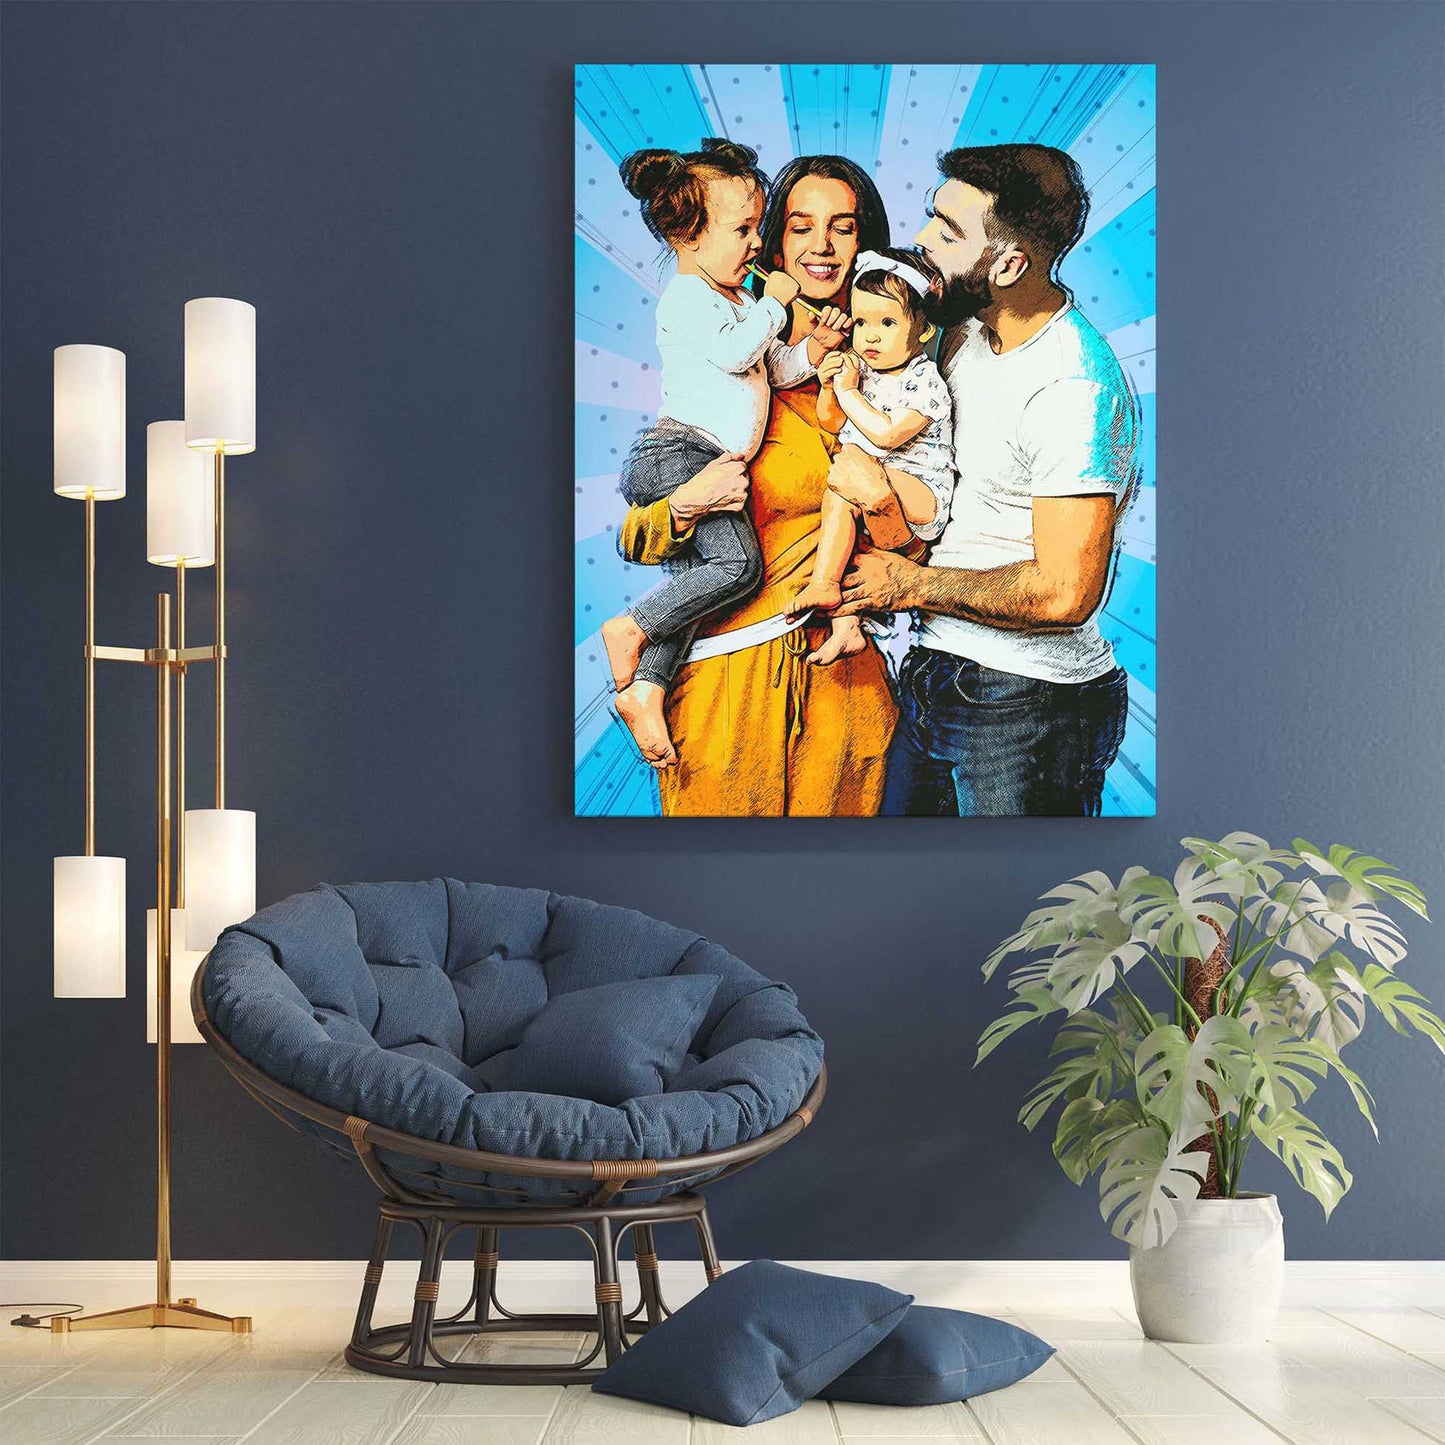 Add a touch of comic-inspired fun to your wall with our customised Cartoon Comic Canvas. Perfect for bringing life to any occasion, from lively get-togethers to joyful graduation celebrations and treasured family photos